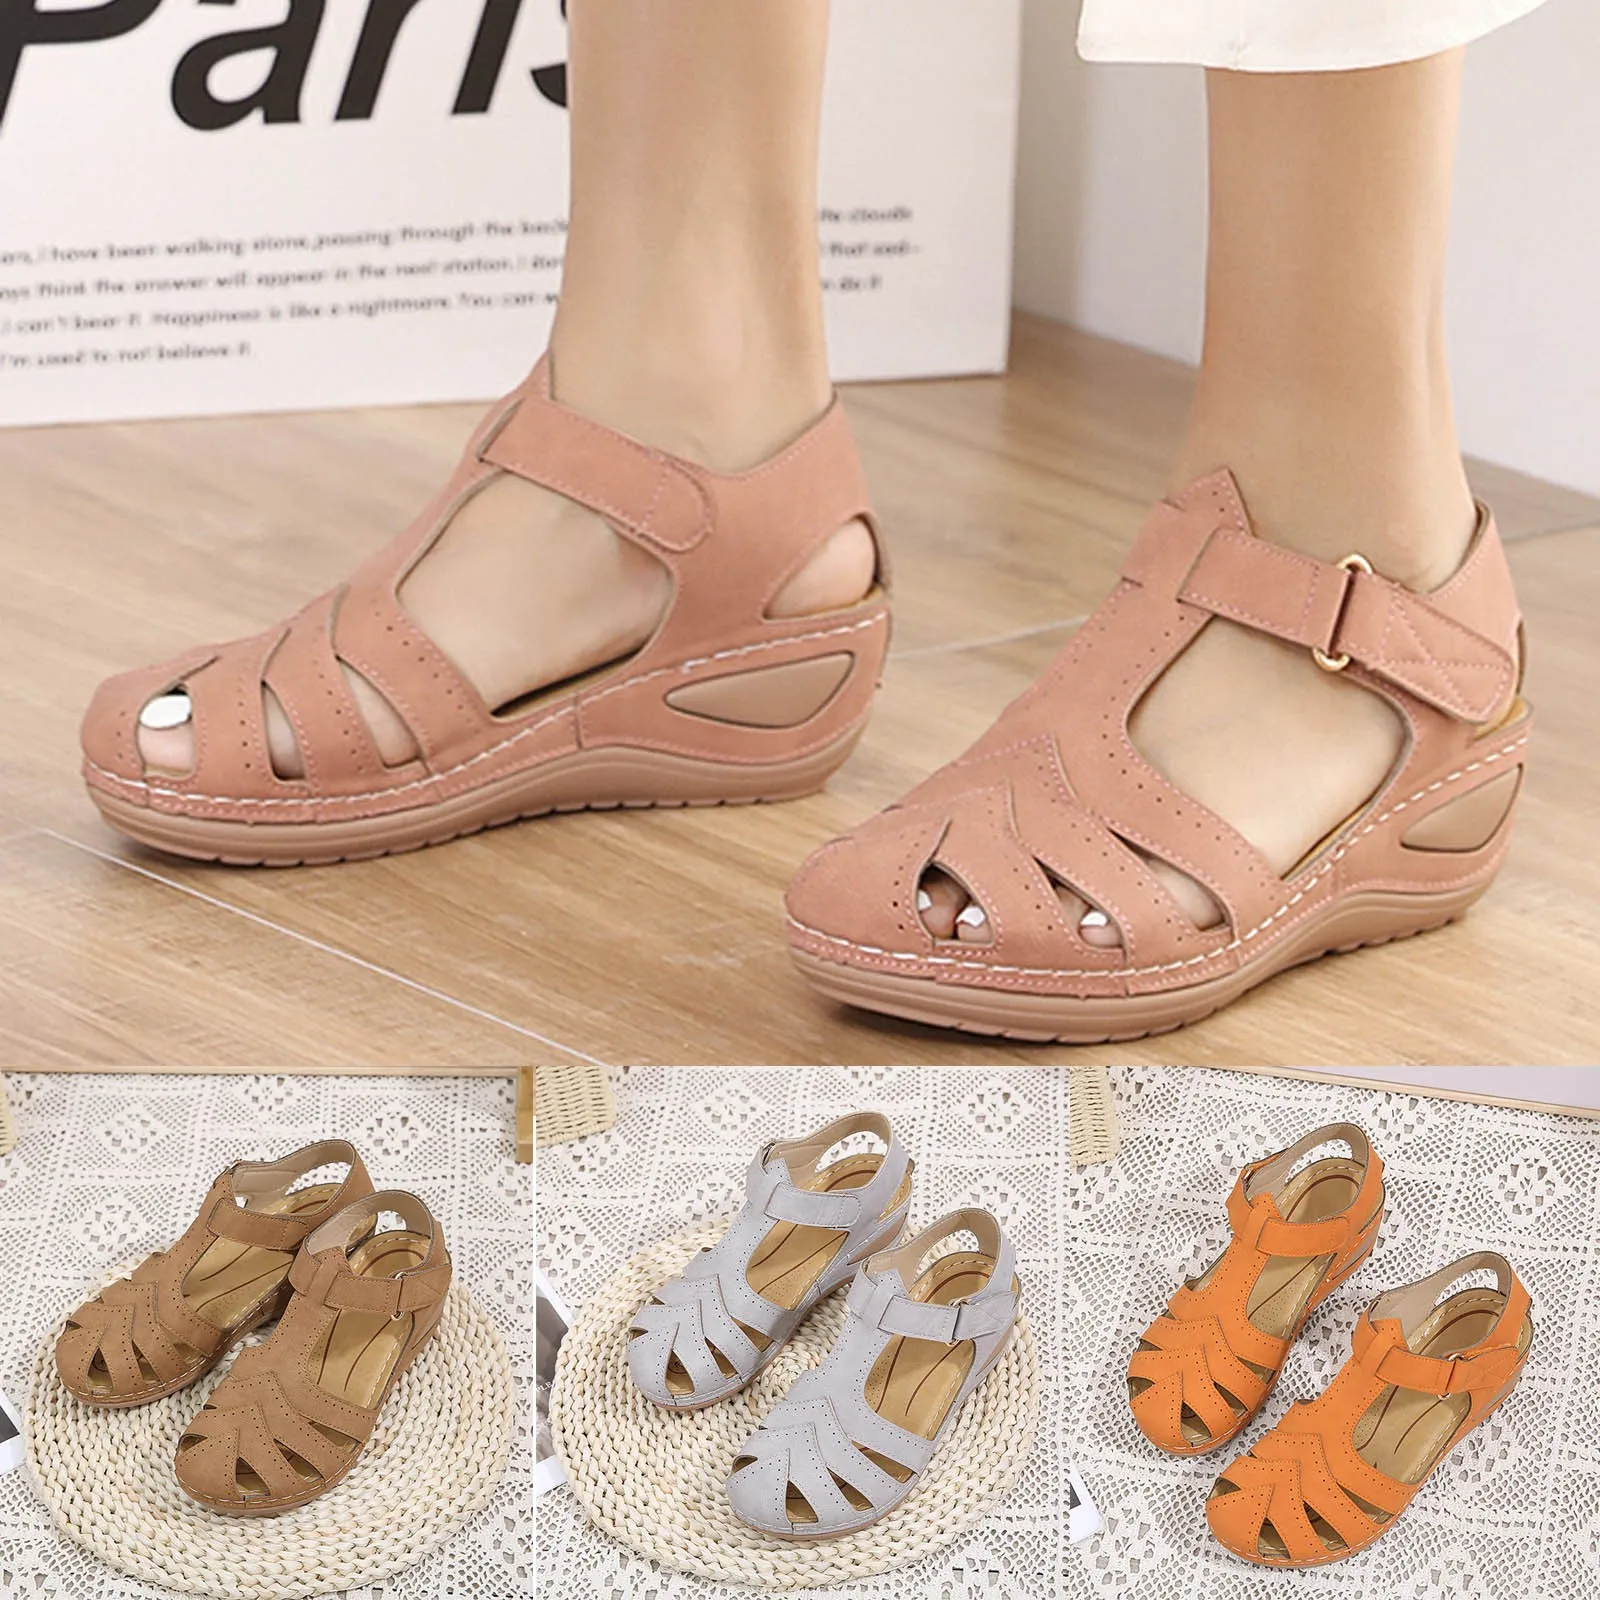 

2022 Fashion Women Sandals Summer Casual Sewing Hollow Out Platform Wedges Shoes Beach Peep Toe Sandals chaussure femme #40